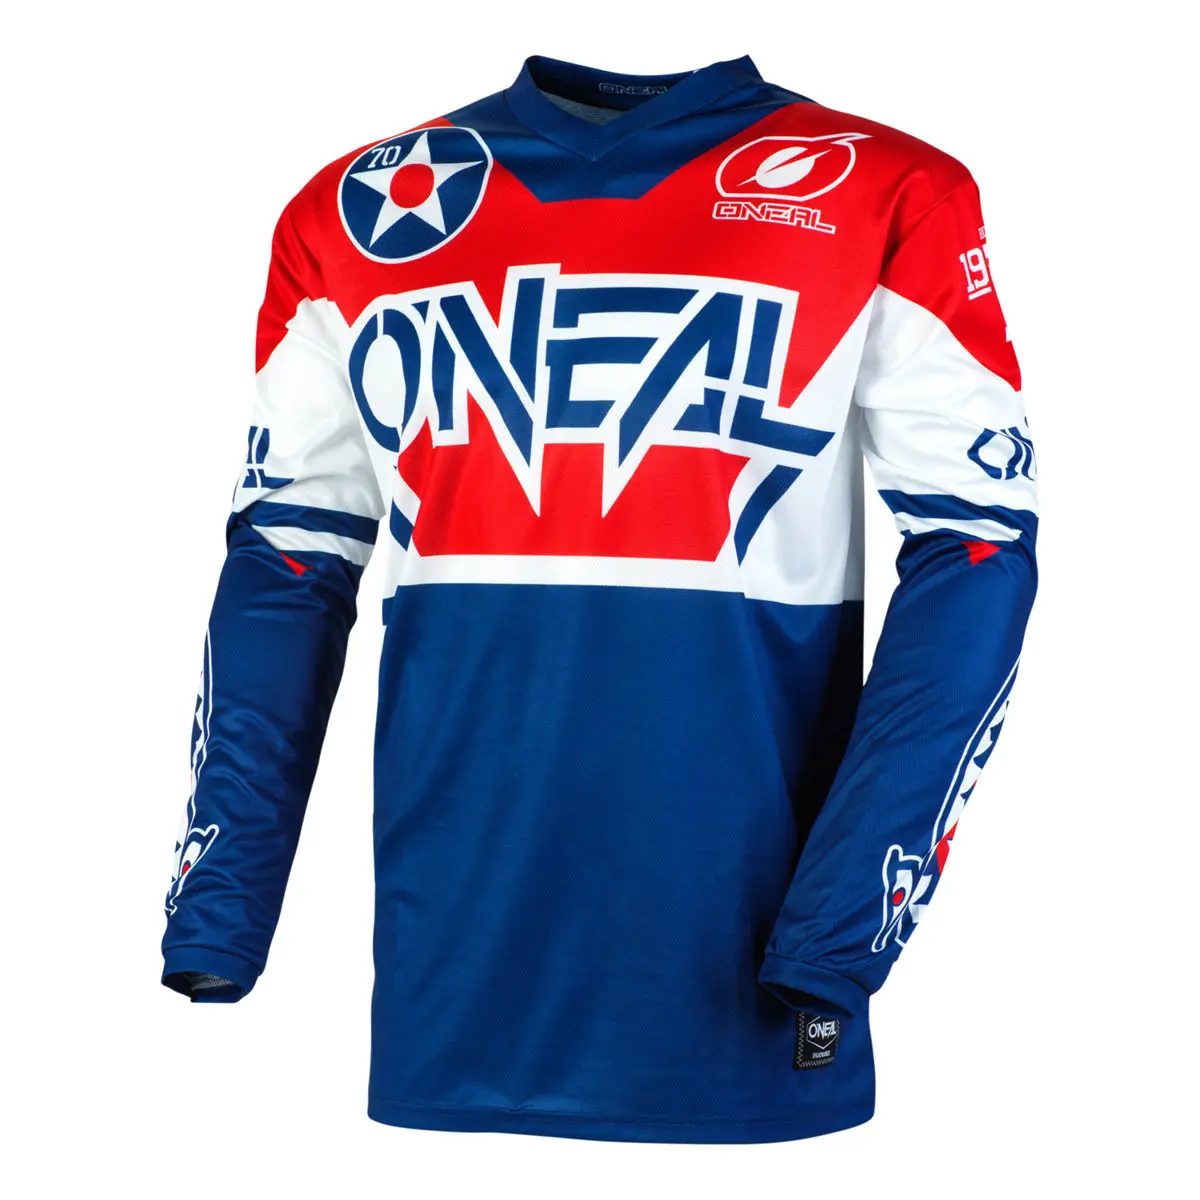 2020_ONeal_ELEMENT_Jersey_WARHAWK_blue_red_front